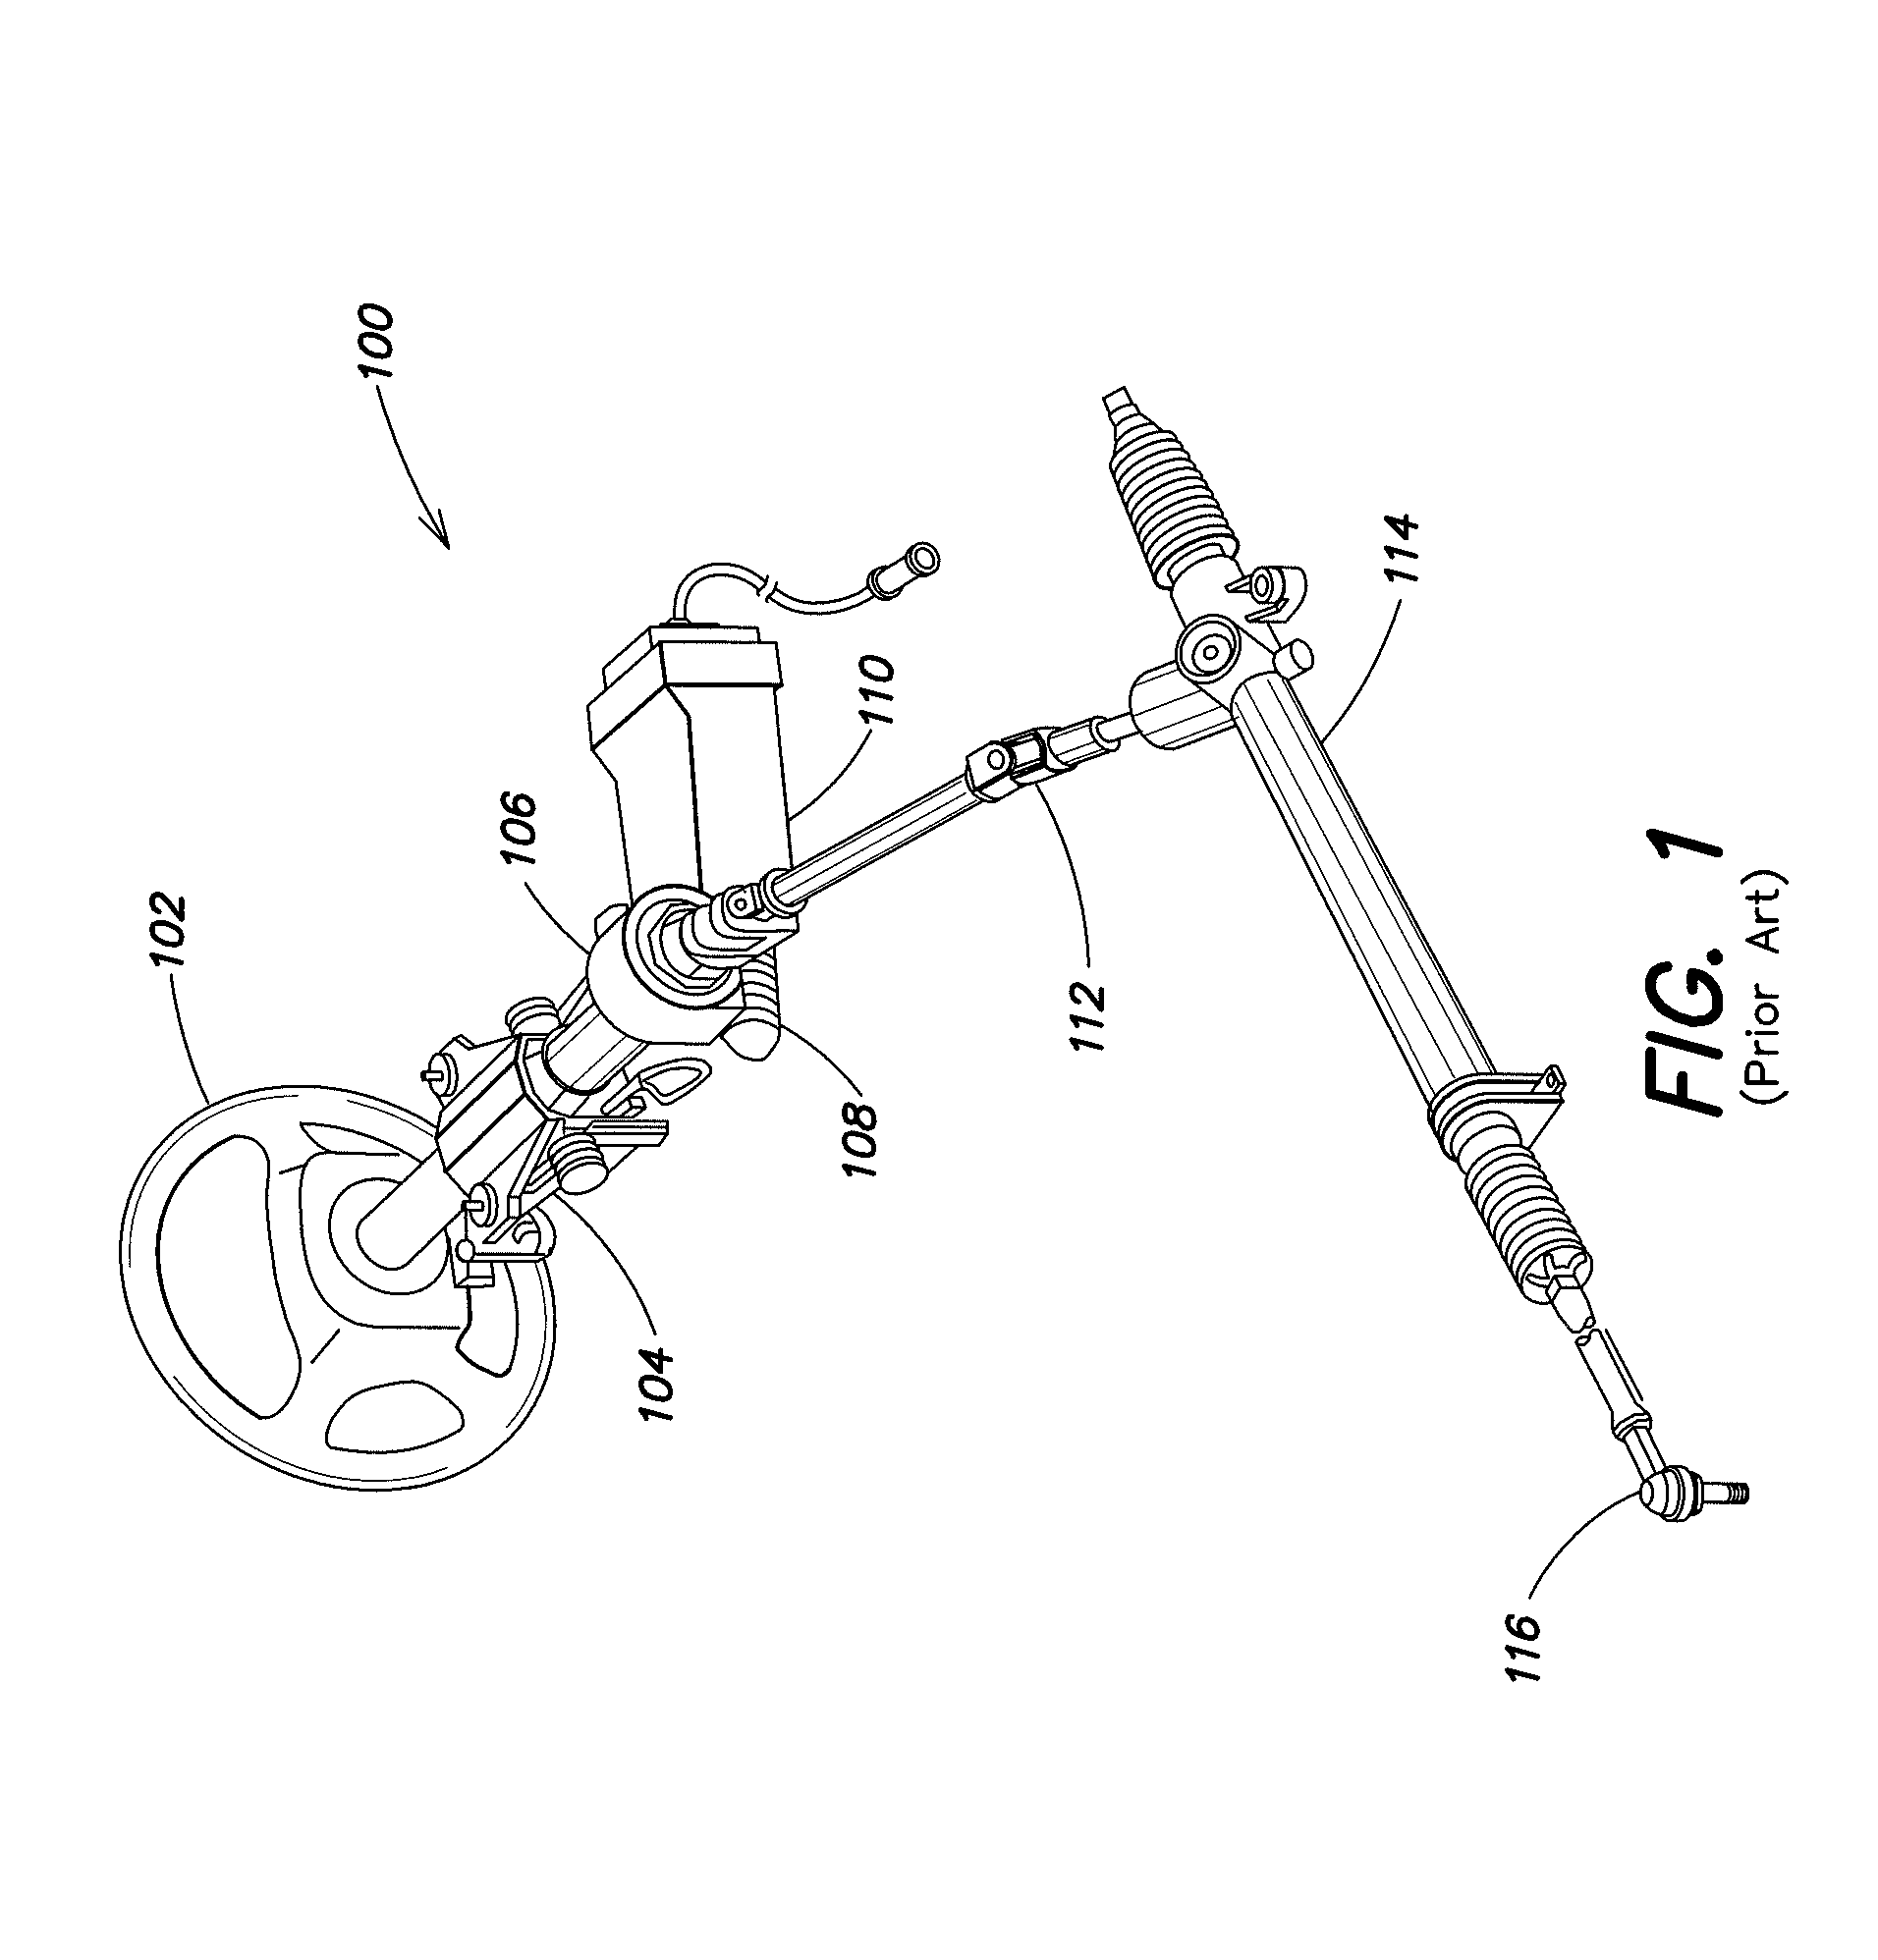 Power-assisted steering having a gear mechanism